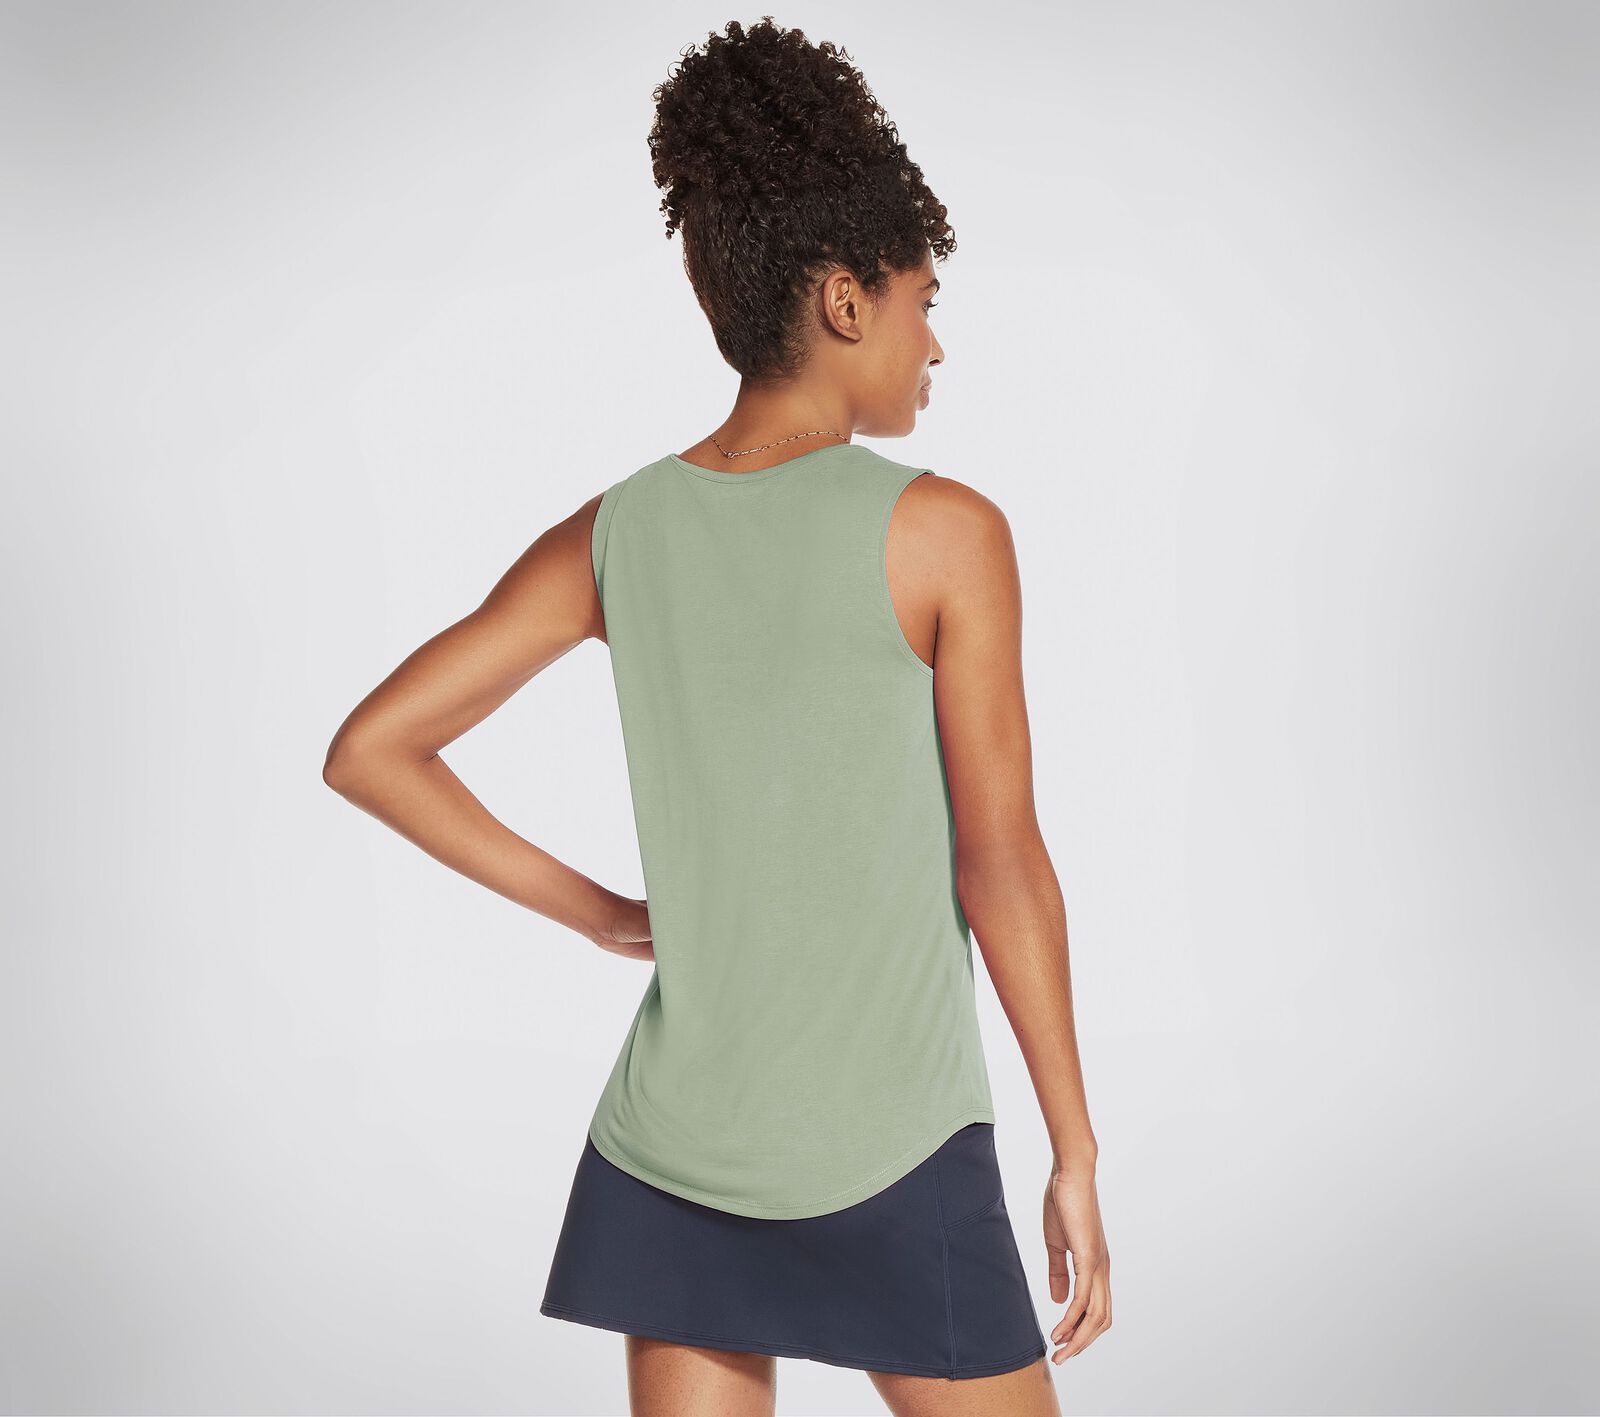 Shop the Skechers Apparel Tranquil Tunic Tank Top | SKECHERS